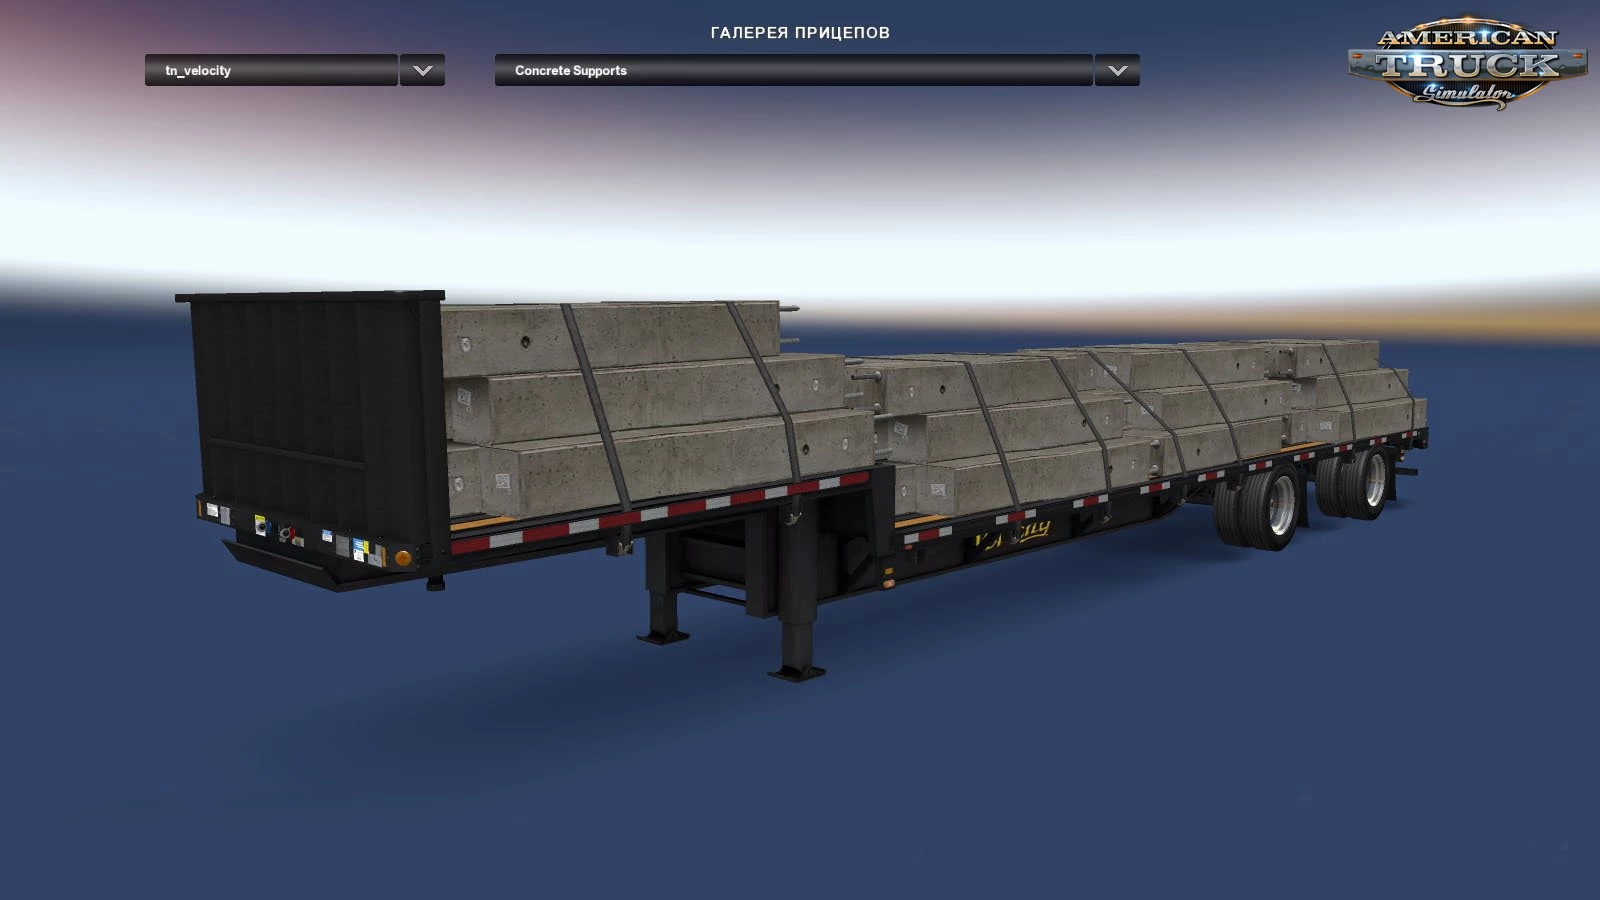 Trailers Pack Fontaine Velocity v1.6 (v1.40.x) for ATS